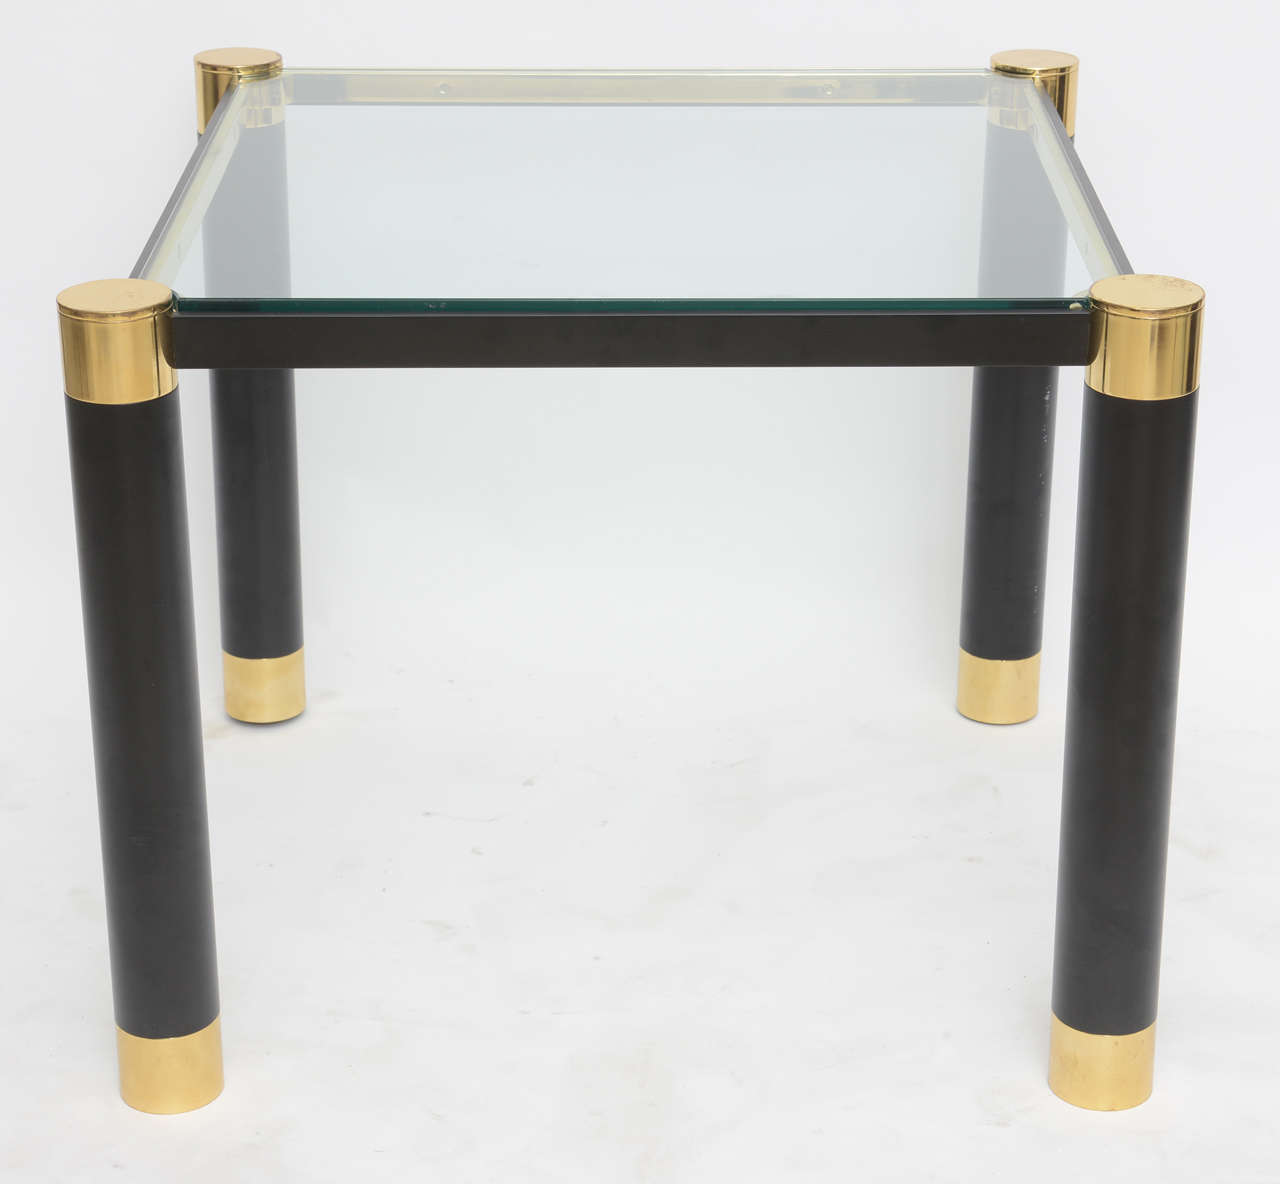 The inset glass with four legs with brass cylindrical tops and ebonized metal legs terminating in brass caps, joined by ebonized metal stretchers,
provenance, Lobel Modern and authenticated by Mary Forsberg, ex director of Karl Springer limited.